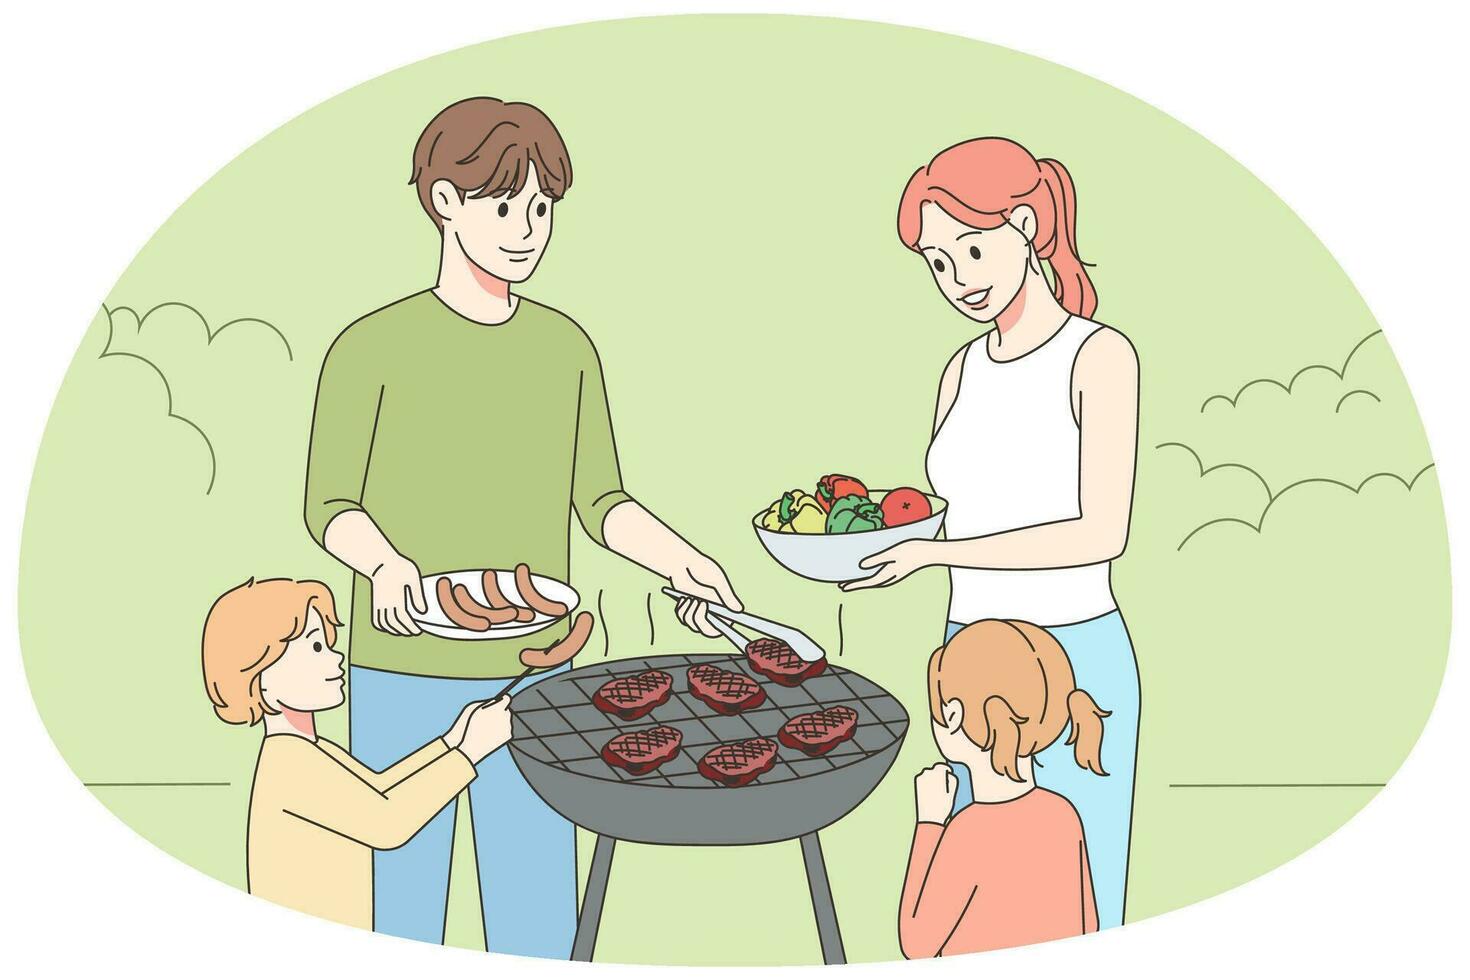 Happy family with children grill meat and vegetables outdoors on summer picnic. Smiling parents with kids have fun enjoy weekend cooking together. Vector illustration.